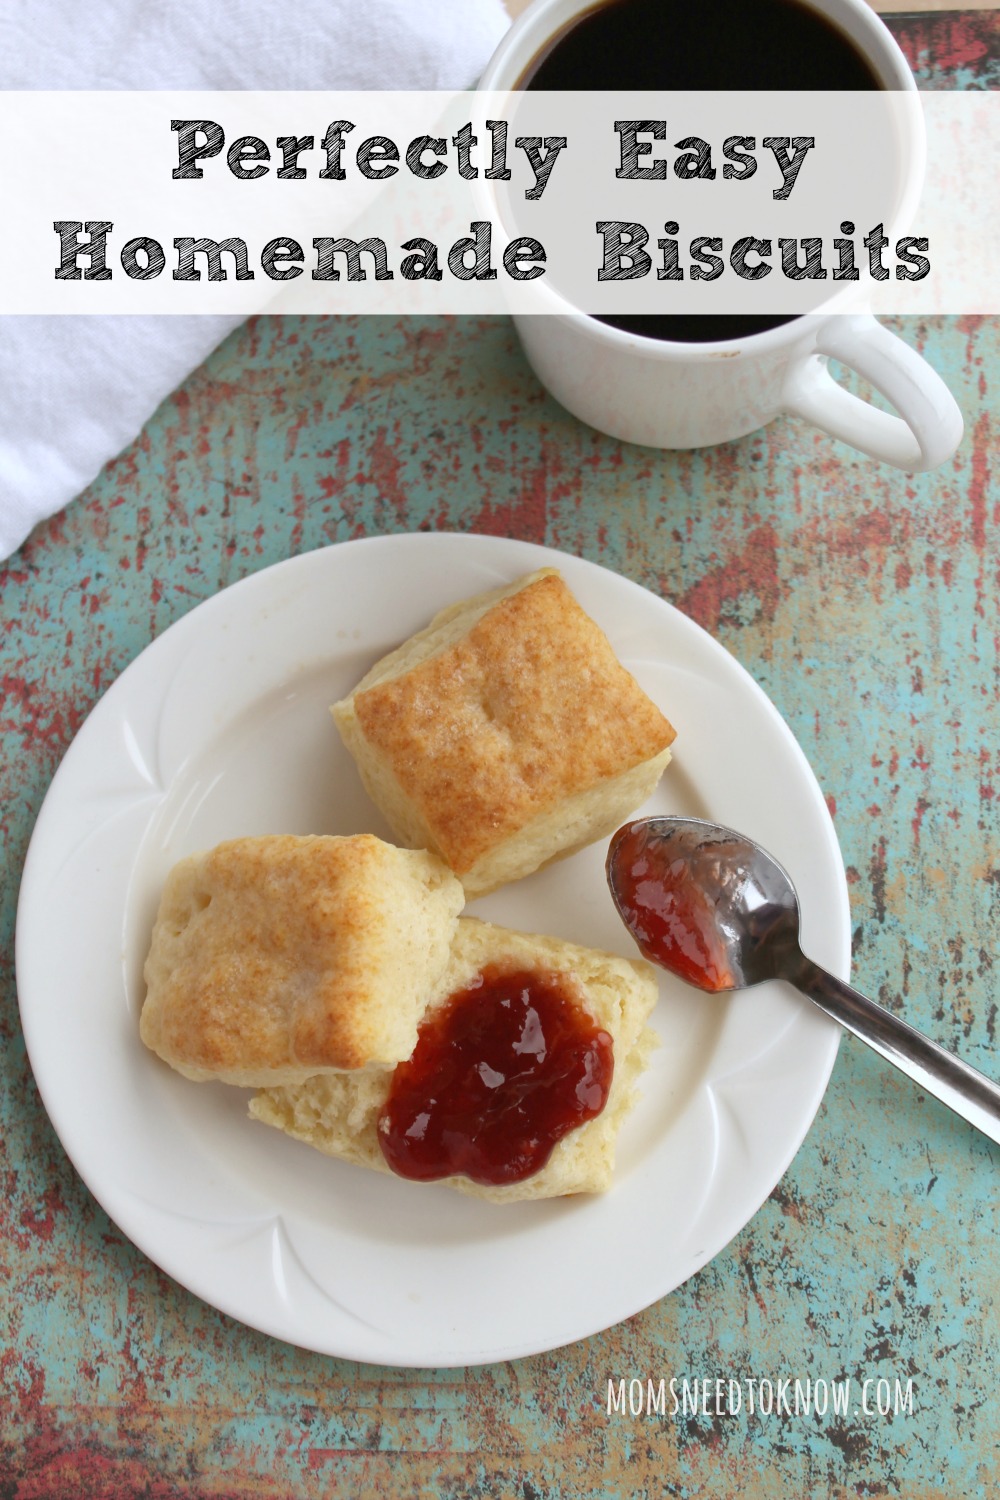 Perfectly Easy Homemade Biscuits